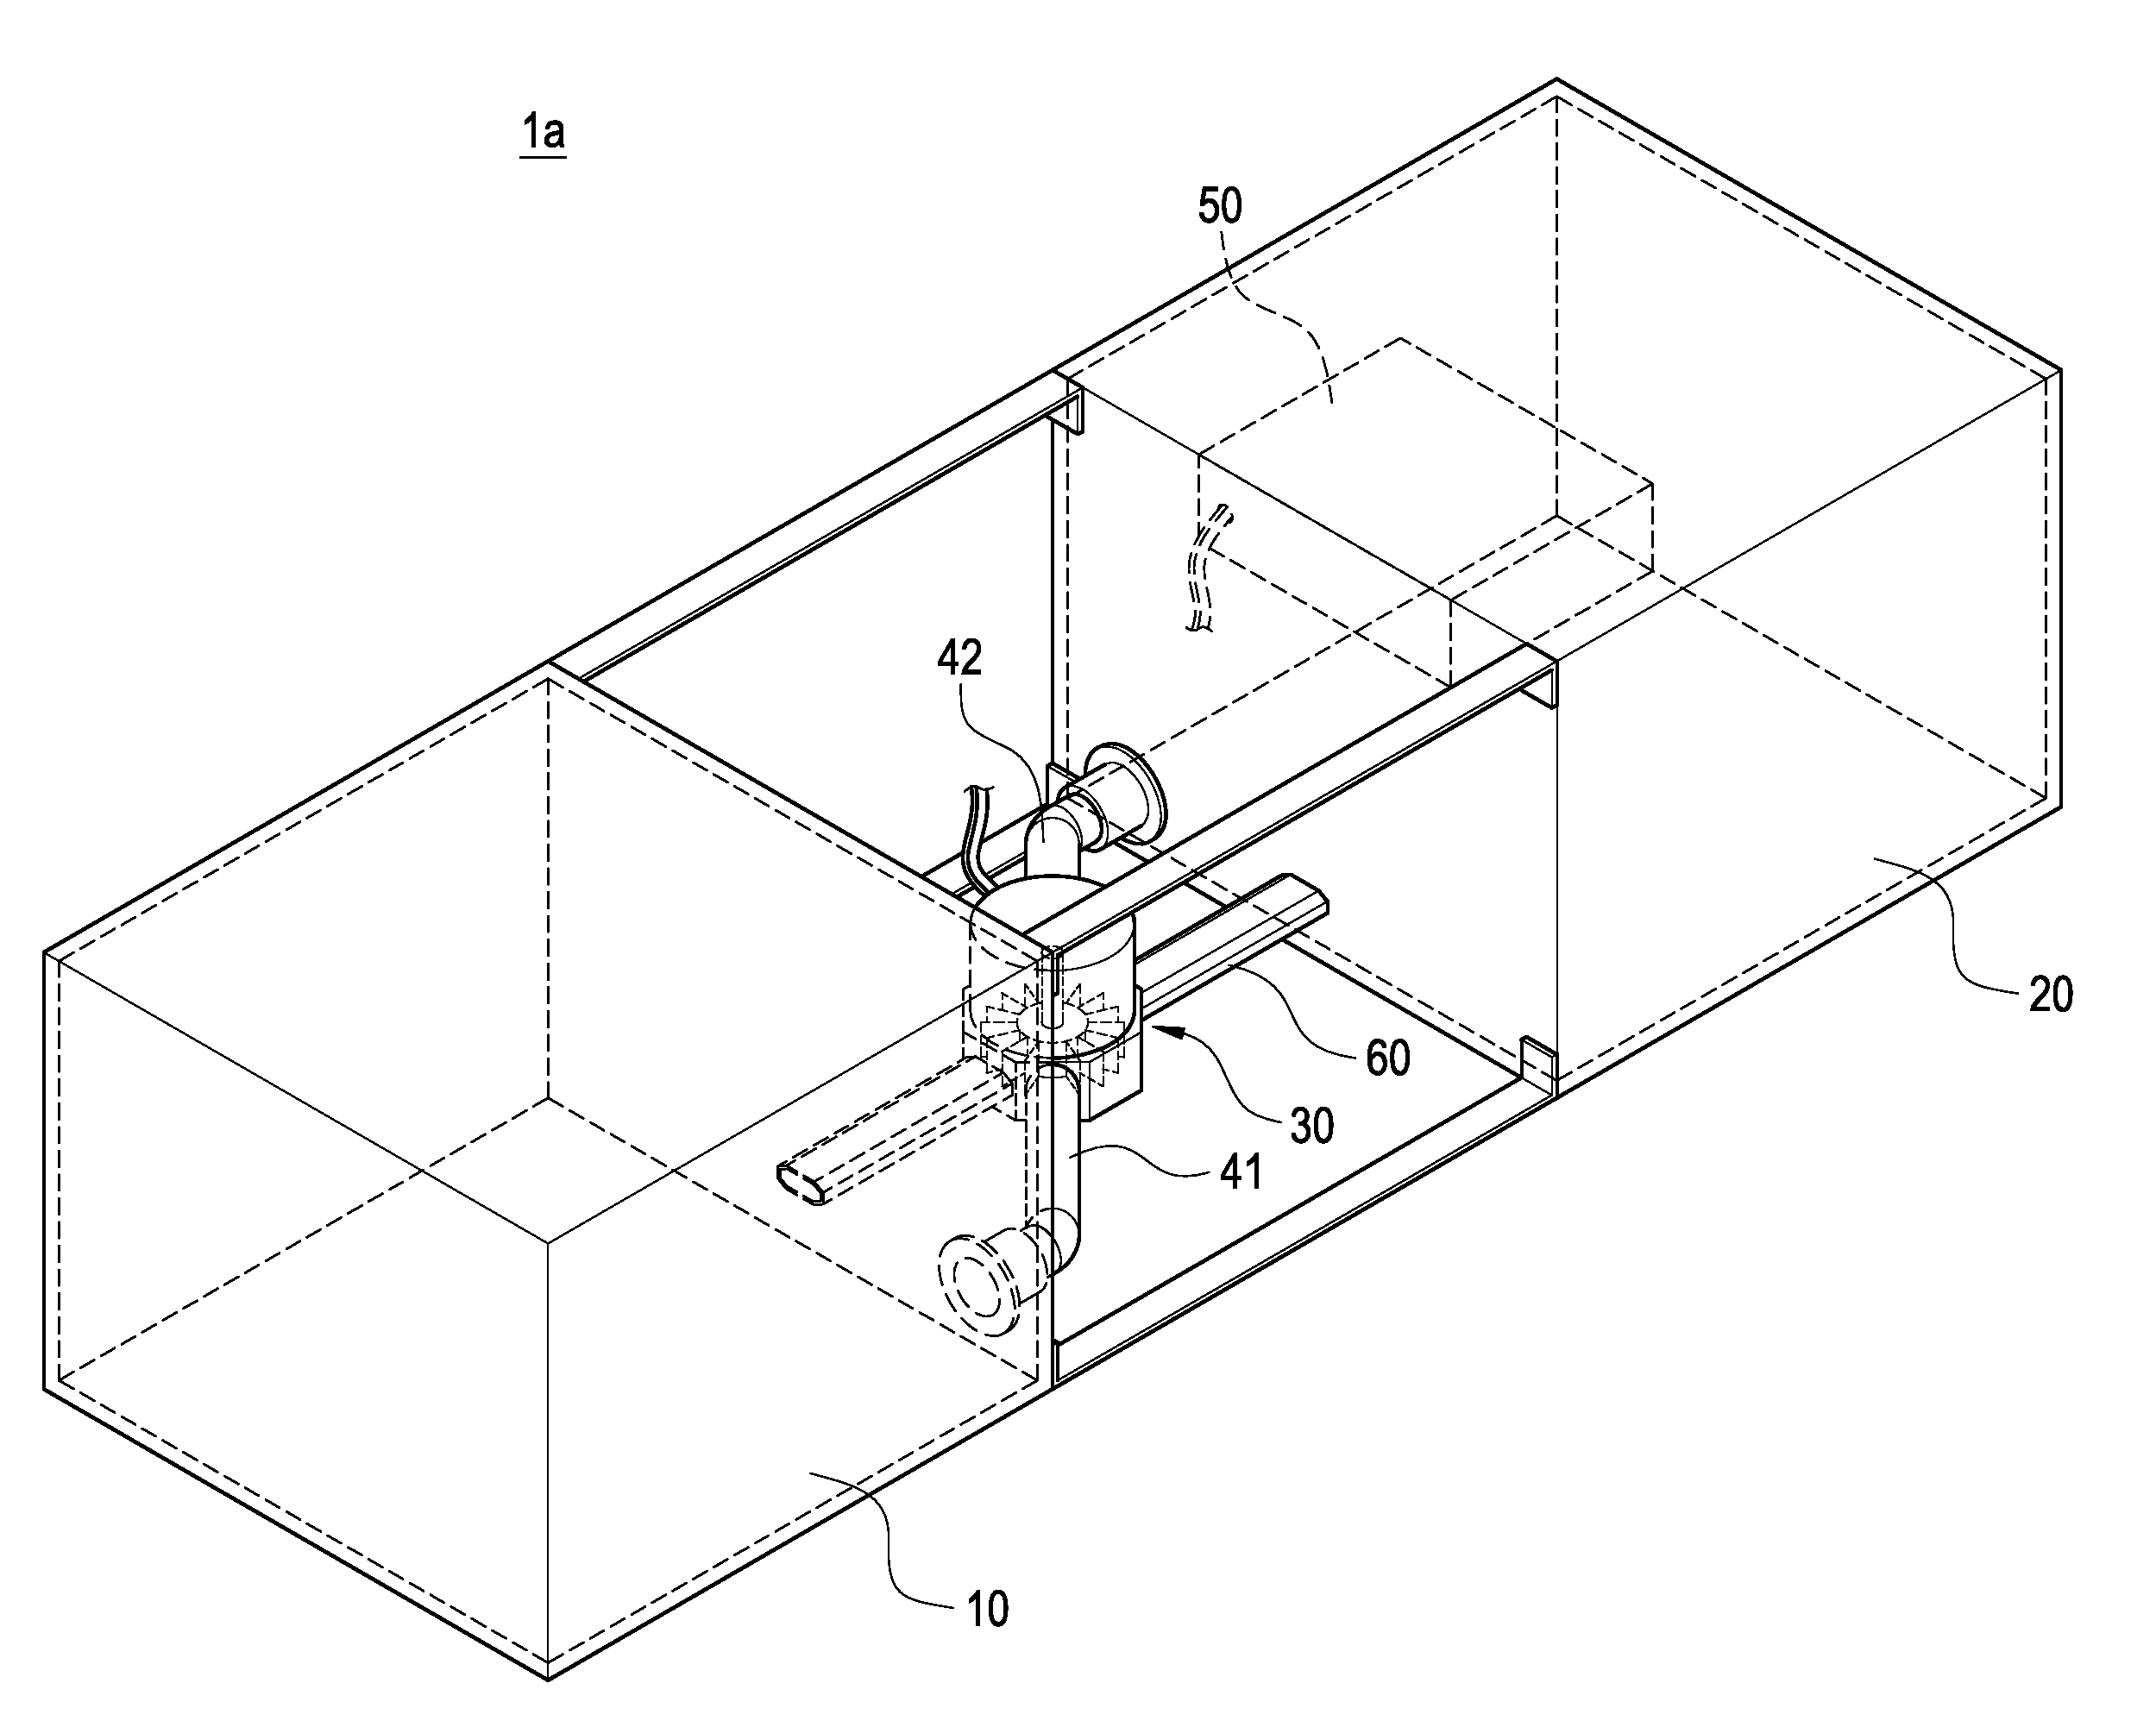 Seesaw-type wave power generating device